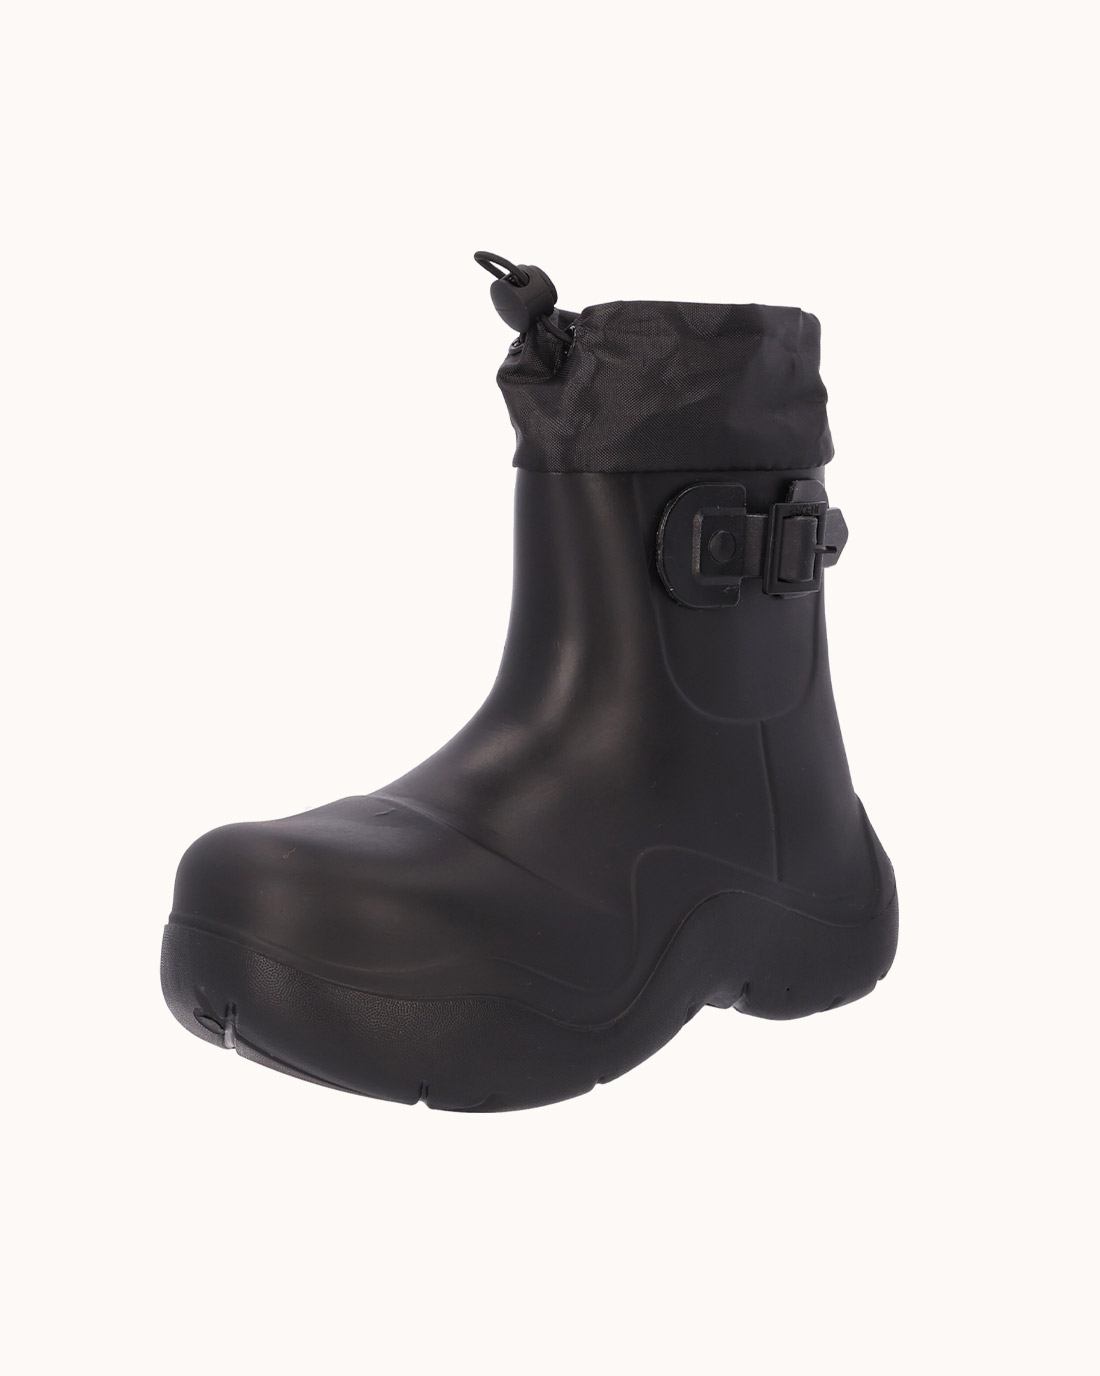 Rose Belted Middle Rainboots (2Colors)